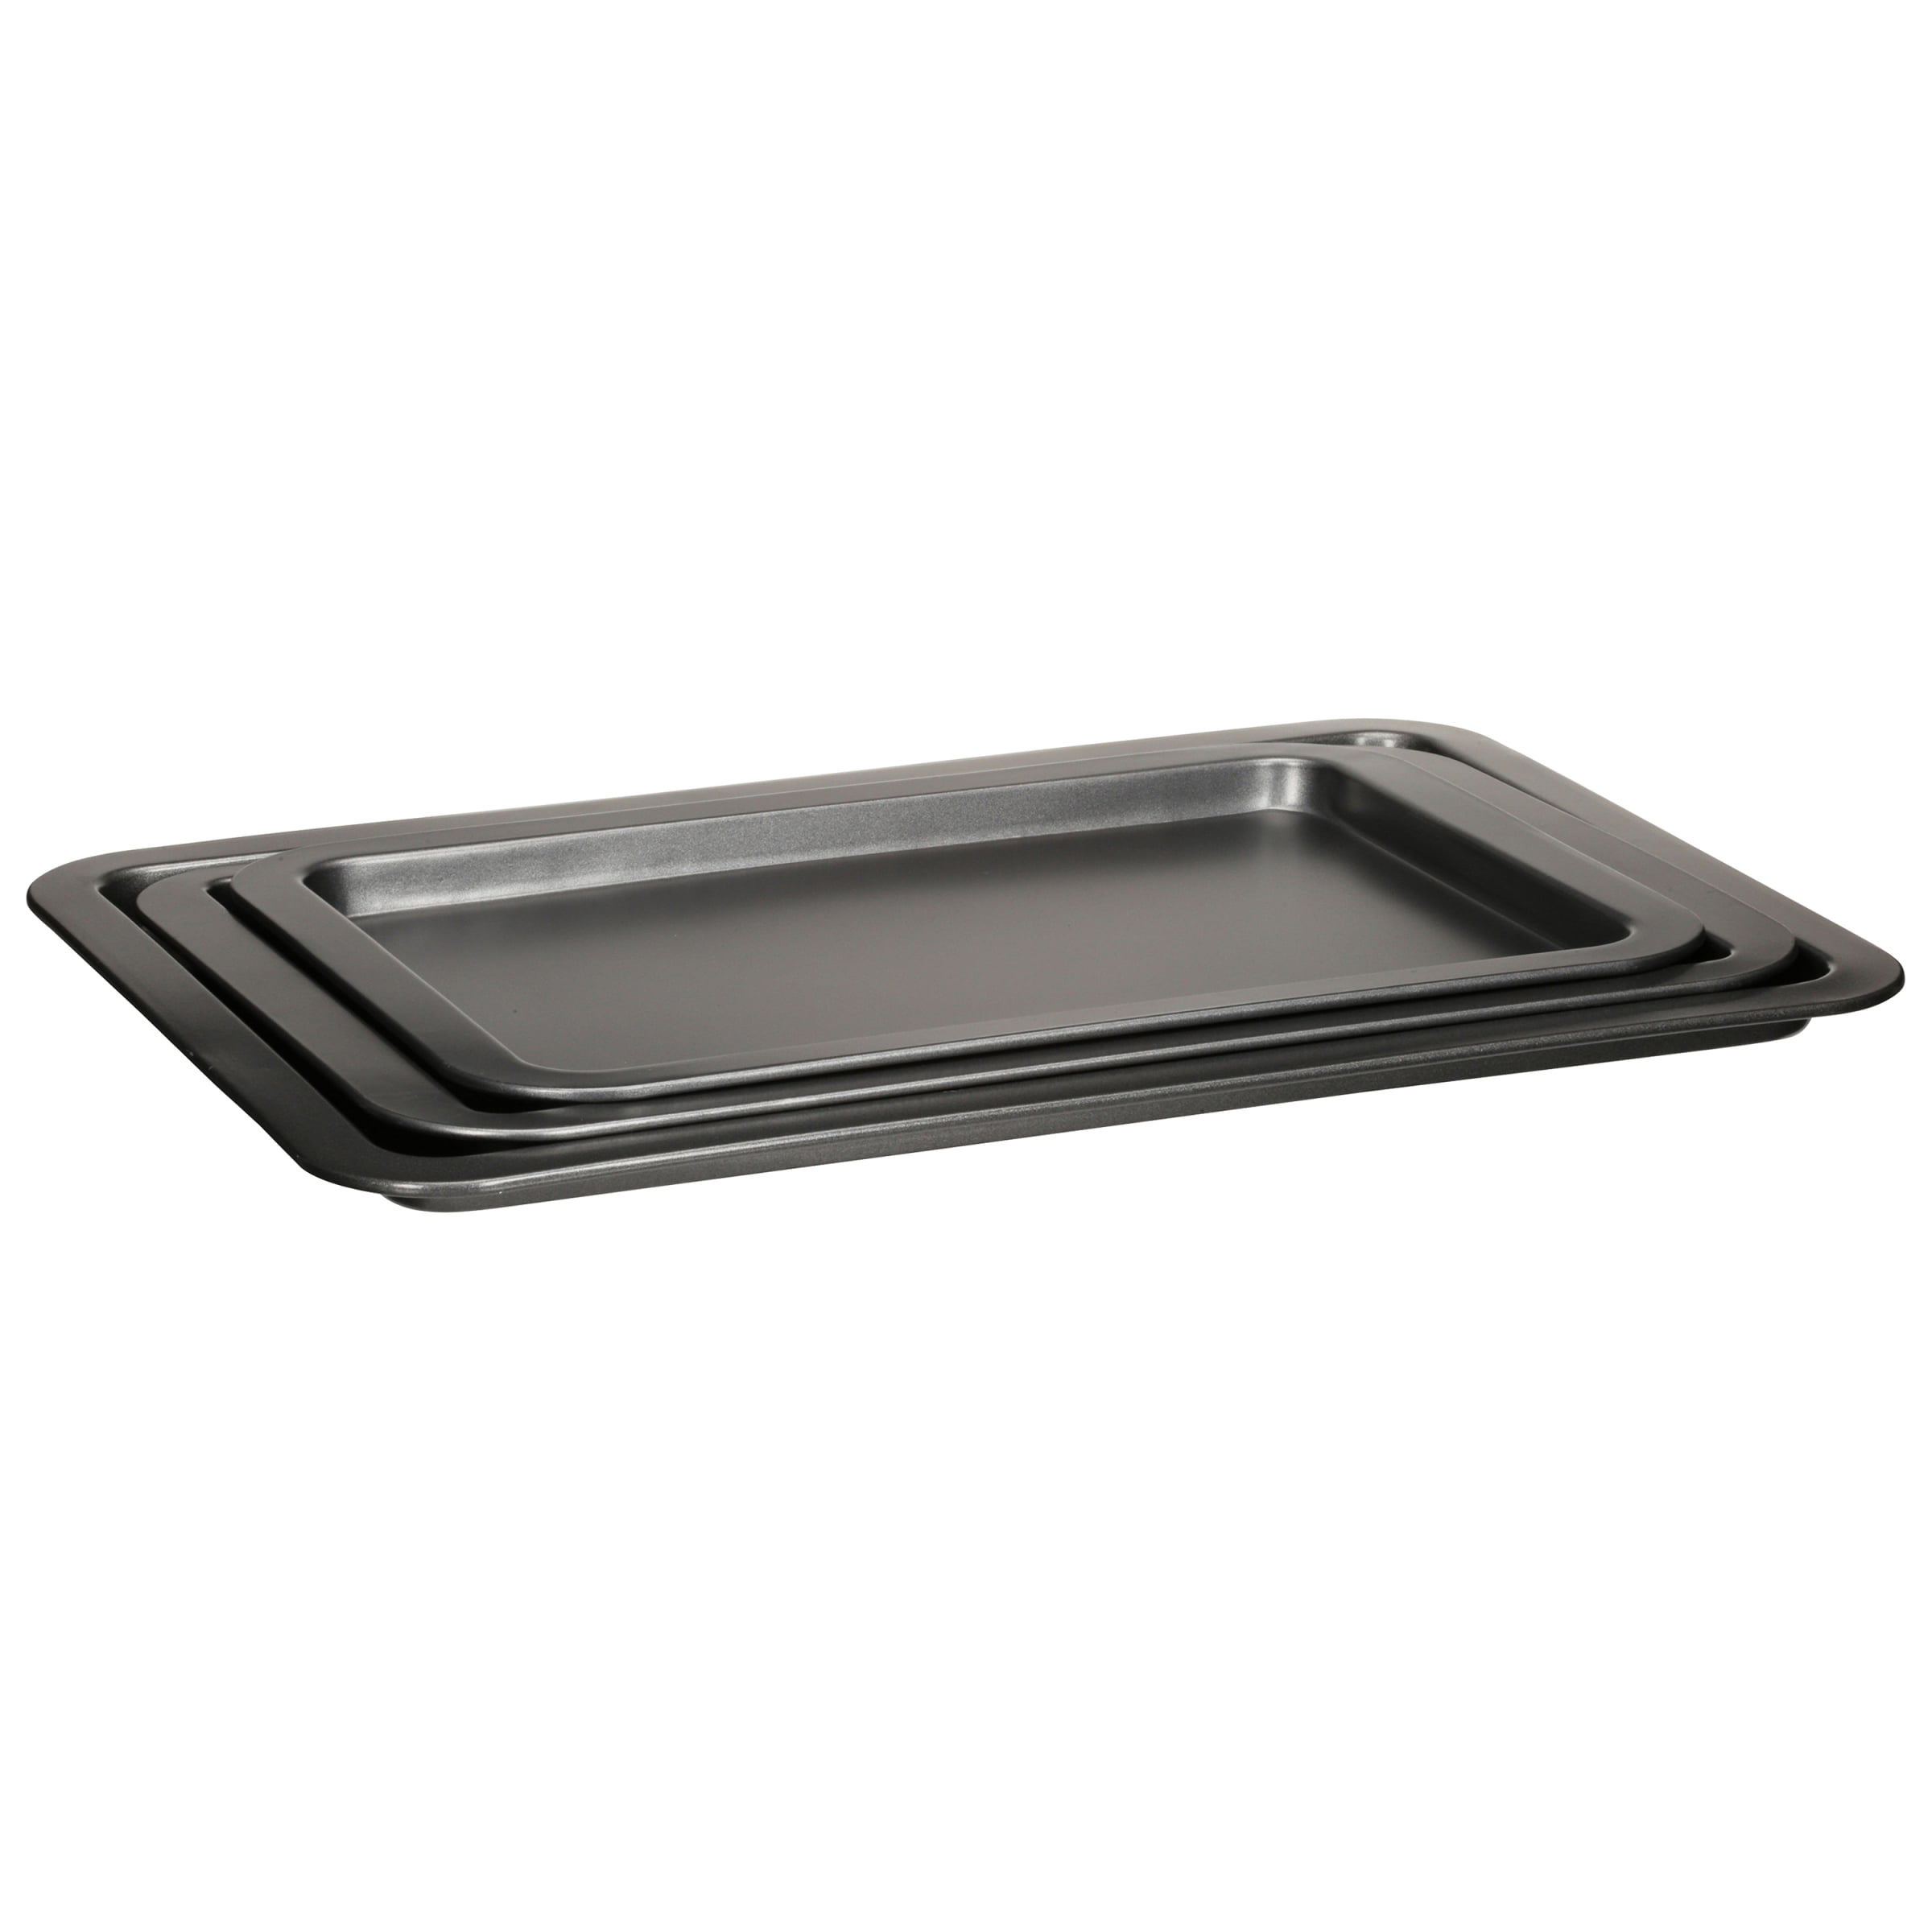 Baking Pan Set – 3 Piece Cookie Sheet, Deluxe Black Non-Stick Carbon Steel,  Silicone Handles, 3 Count - Fry's Food Stores